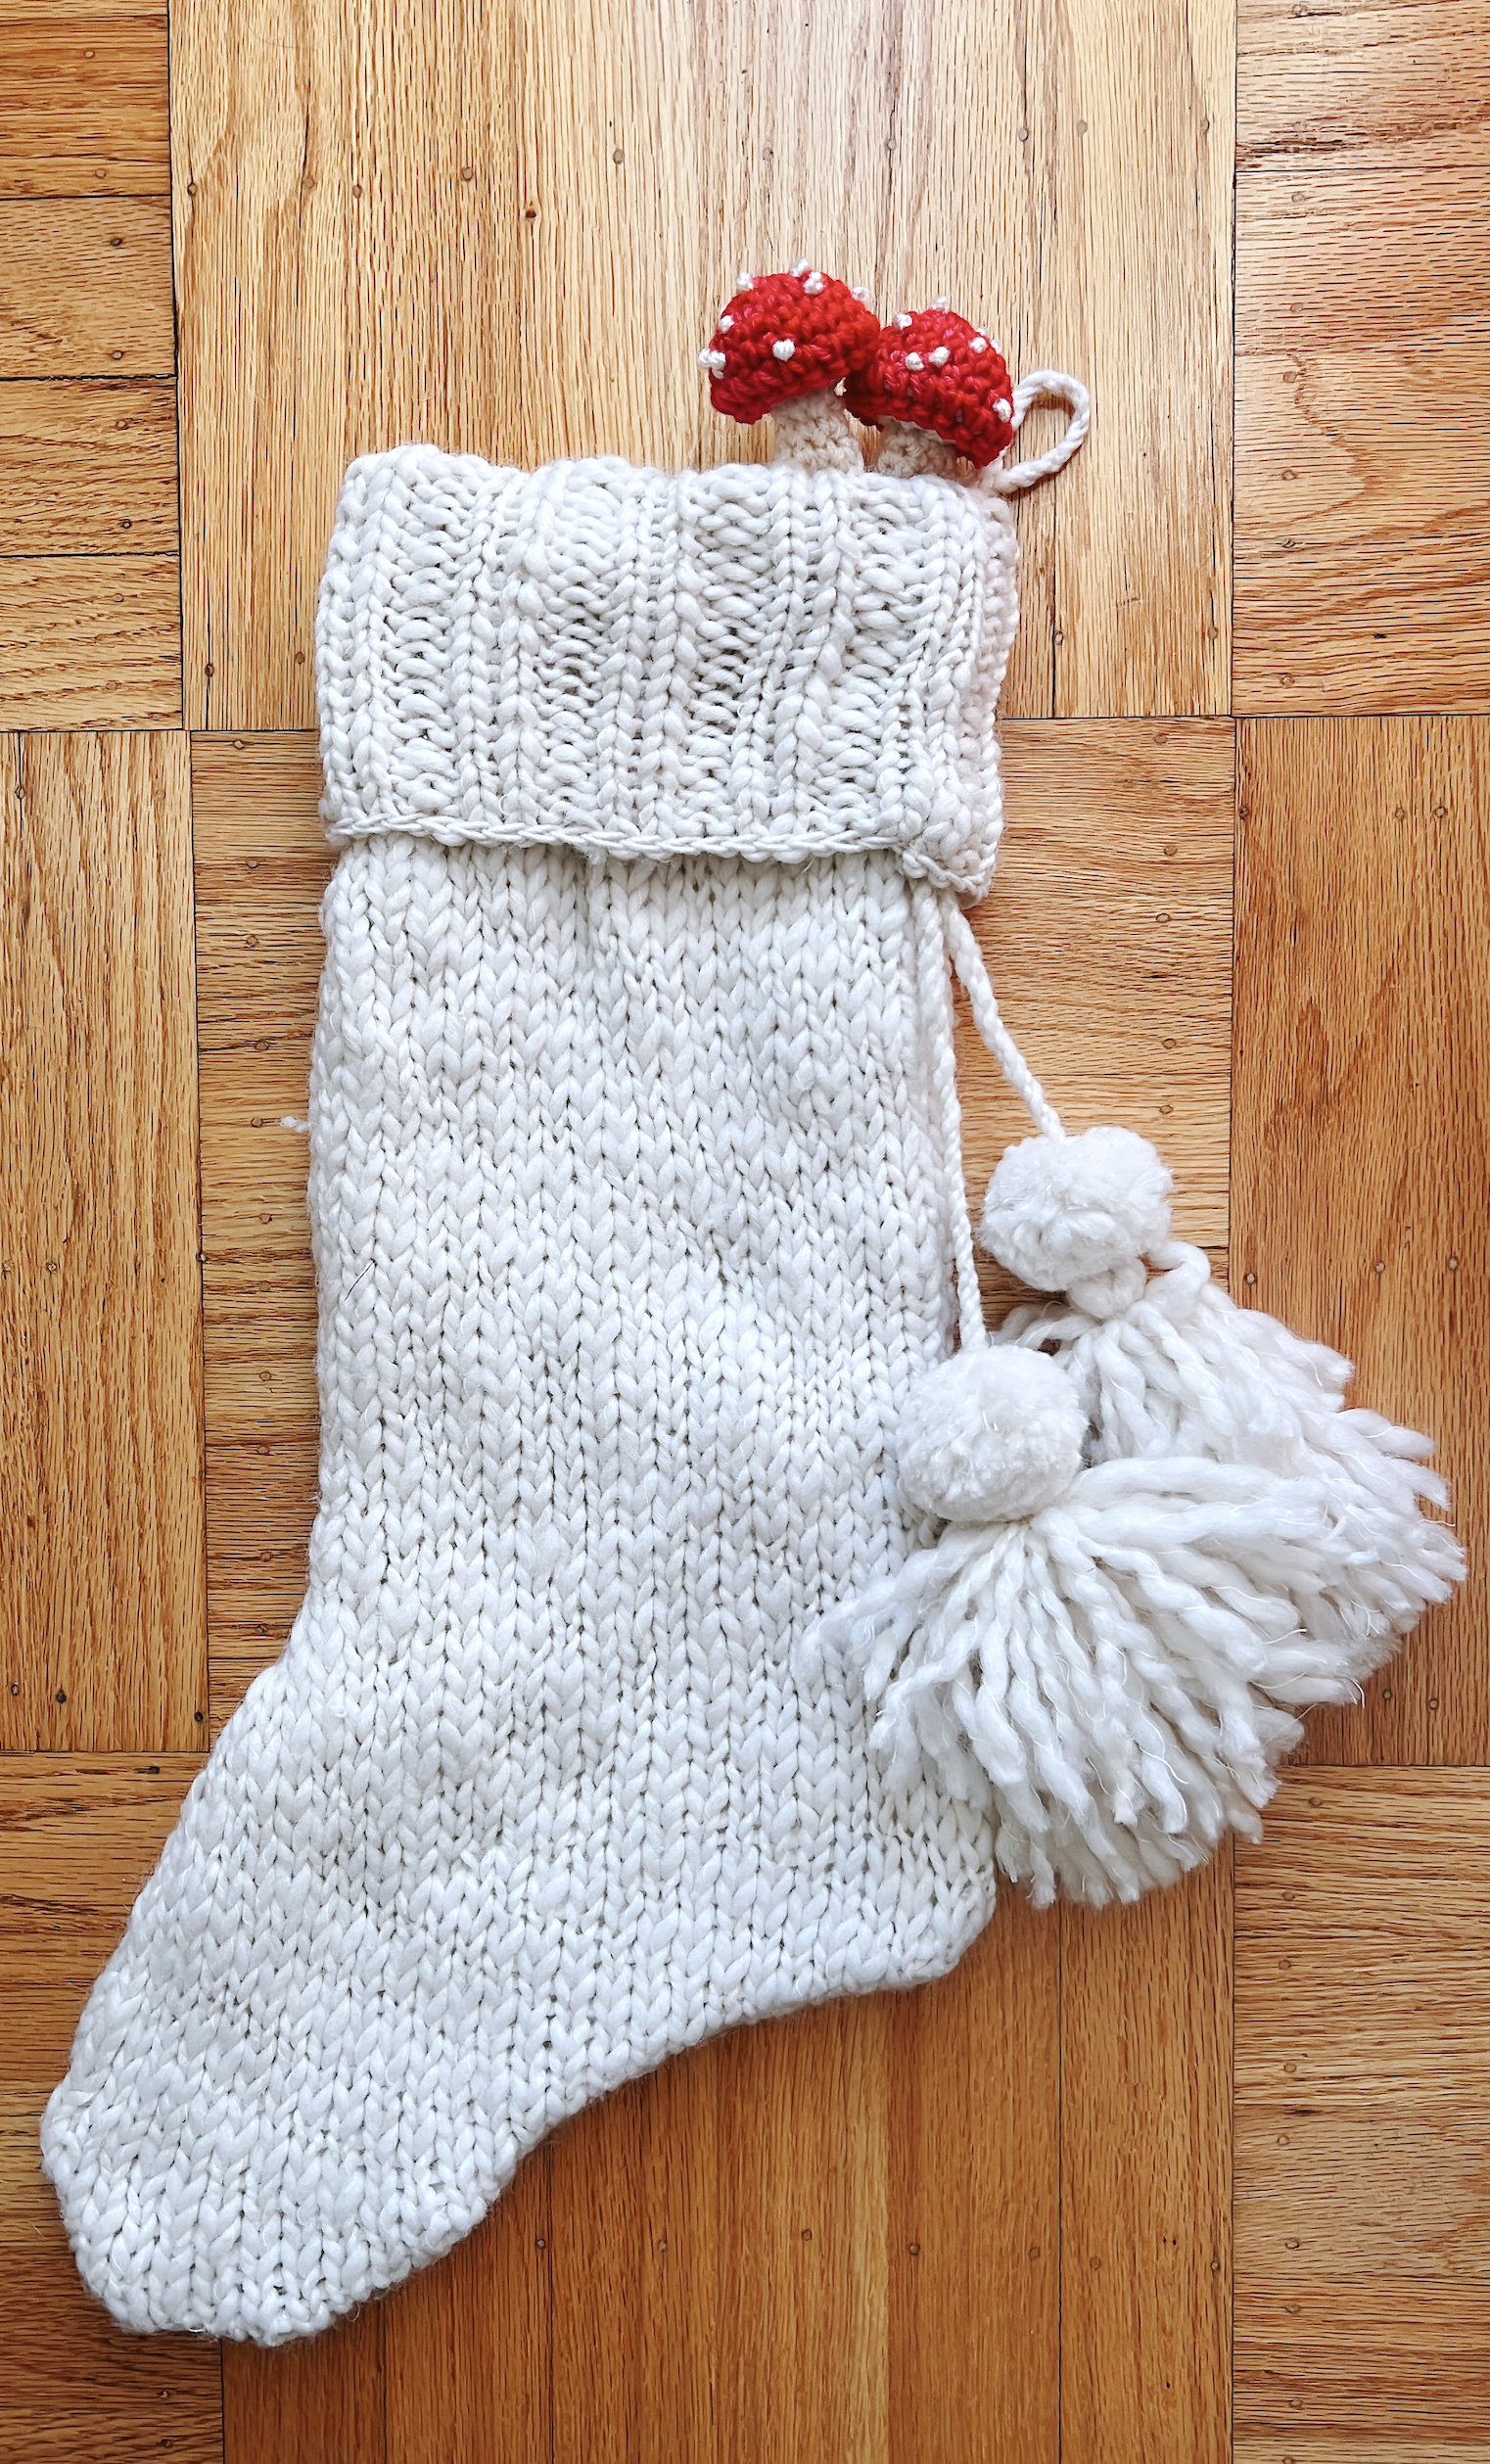 image of white knit stocking with 2 tiny crocheted red and white mushrooms peeking out of the top